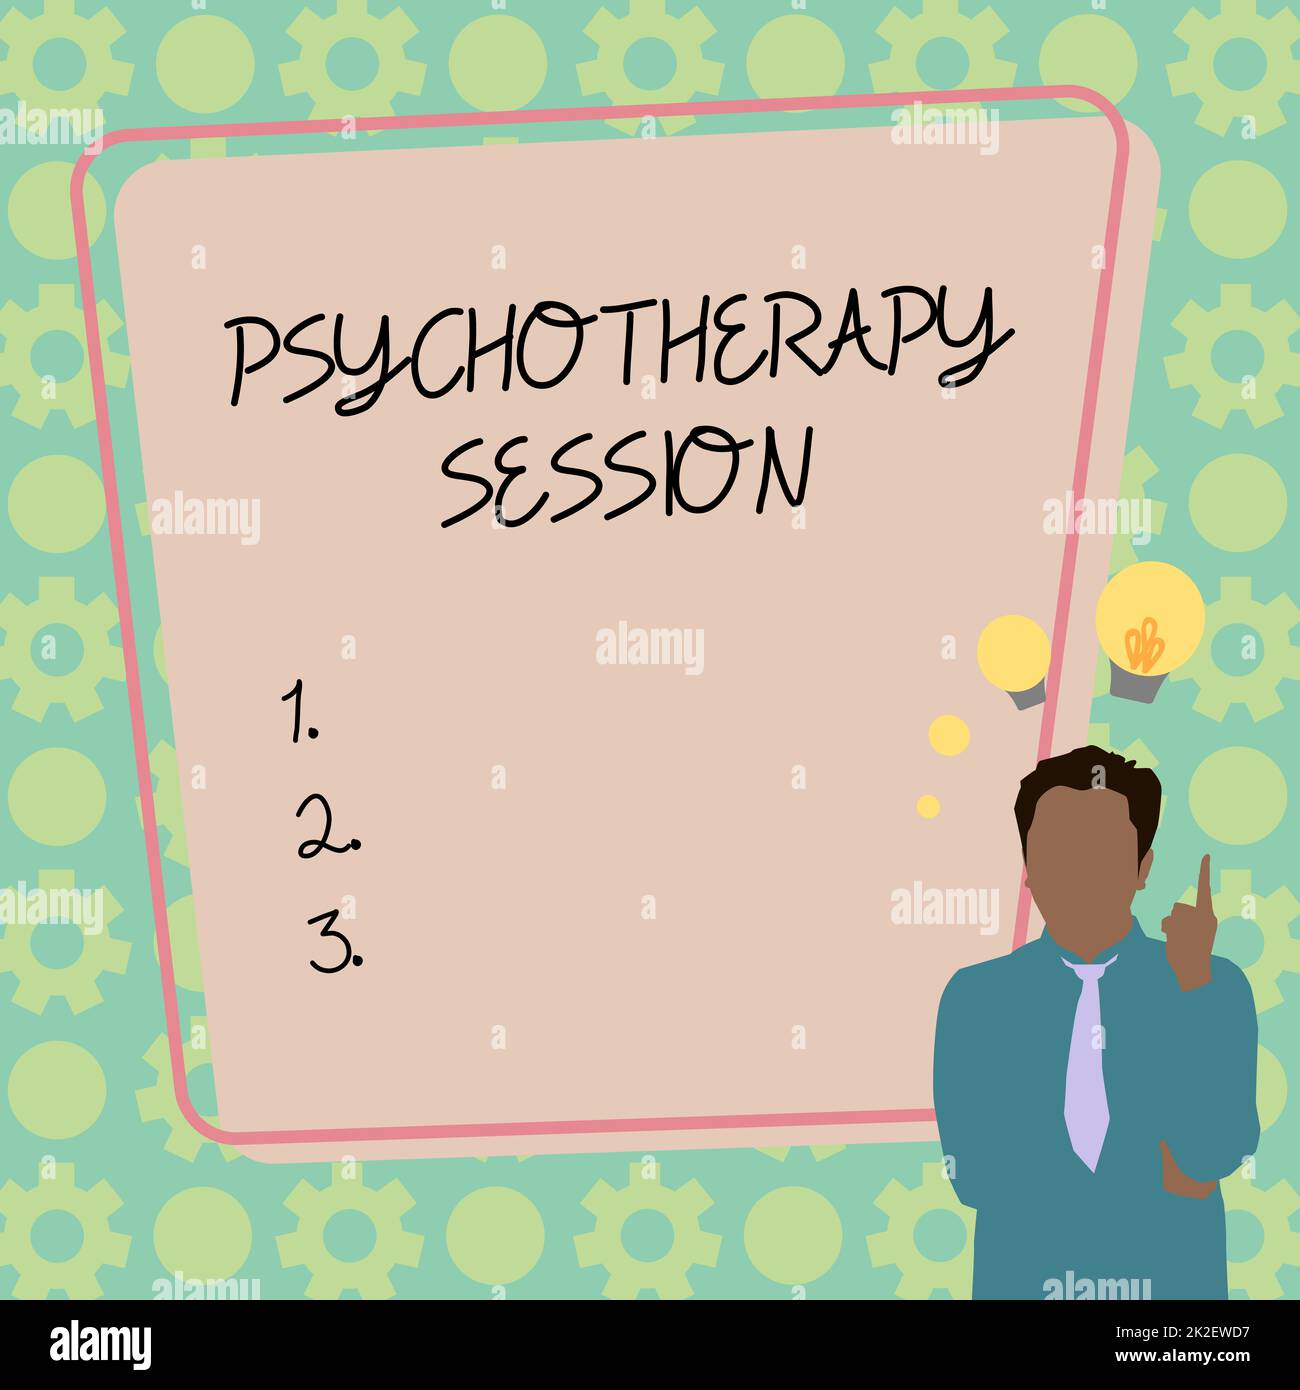 Conceptual display Psychotherapy Session. Business approach treatments that can help with mental health problems Illustration Of A Businessman Standing Coming Up With New Amazing Ideas. Stock Photo